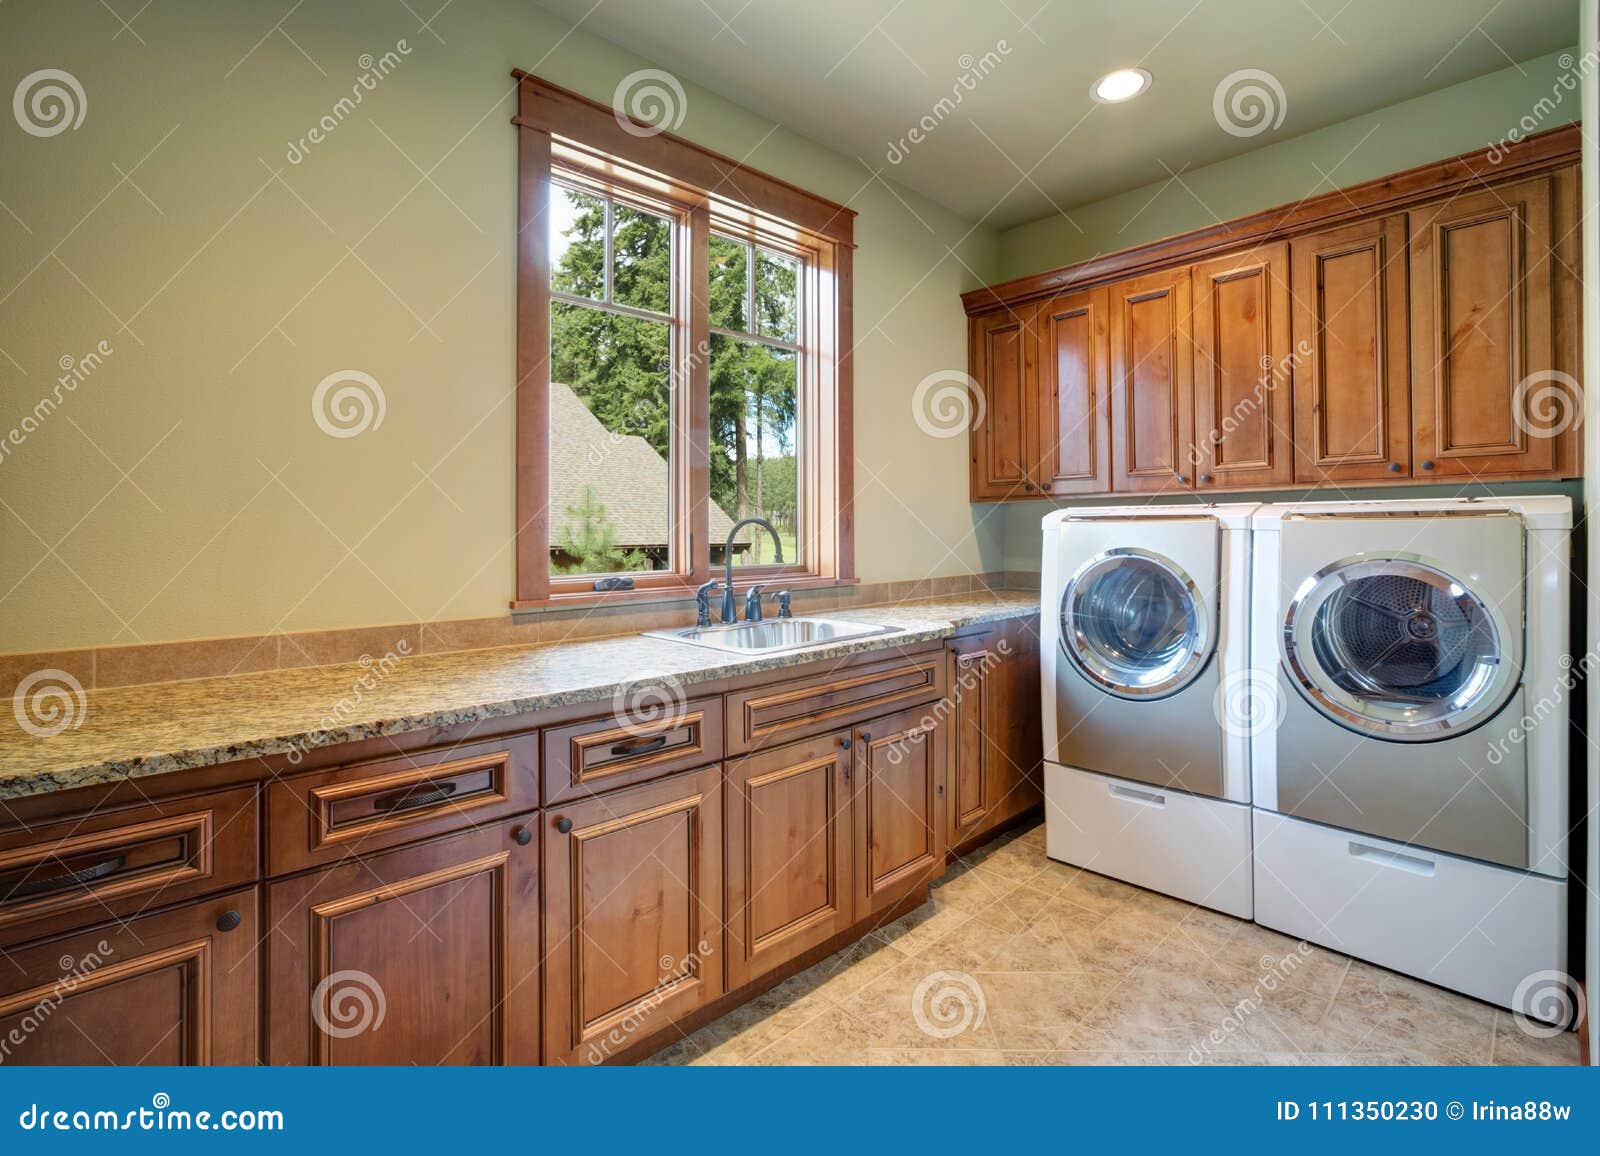 Huge Laundry Room With White Washer And Dryer Stock Photo Image